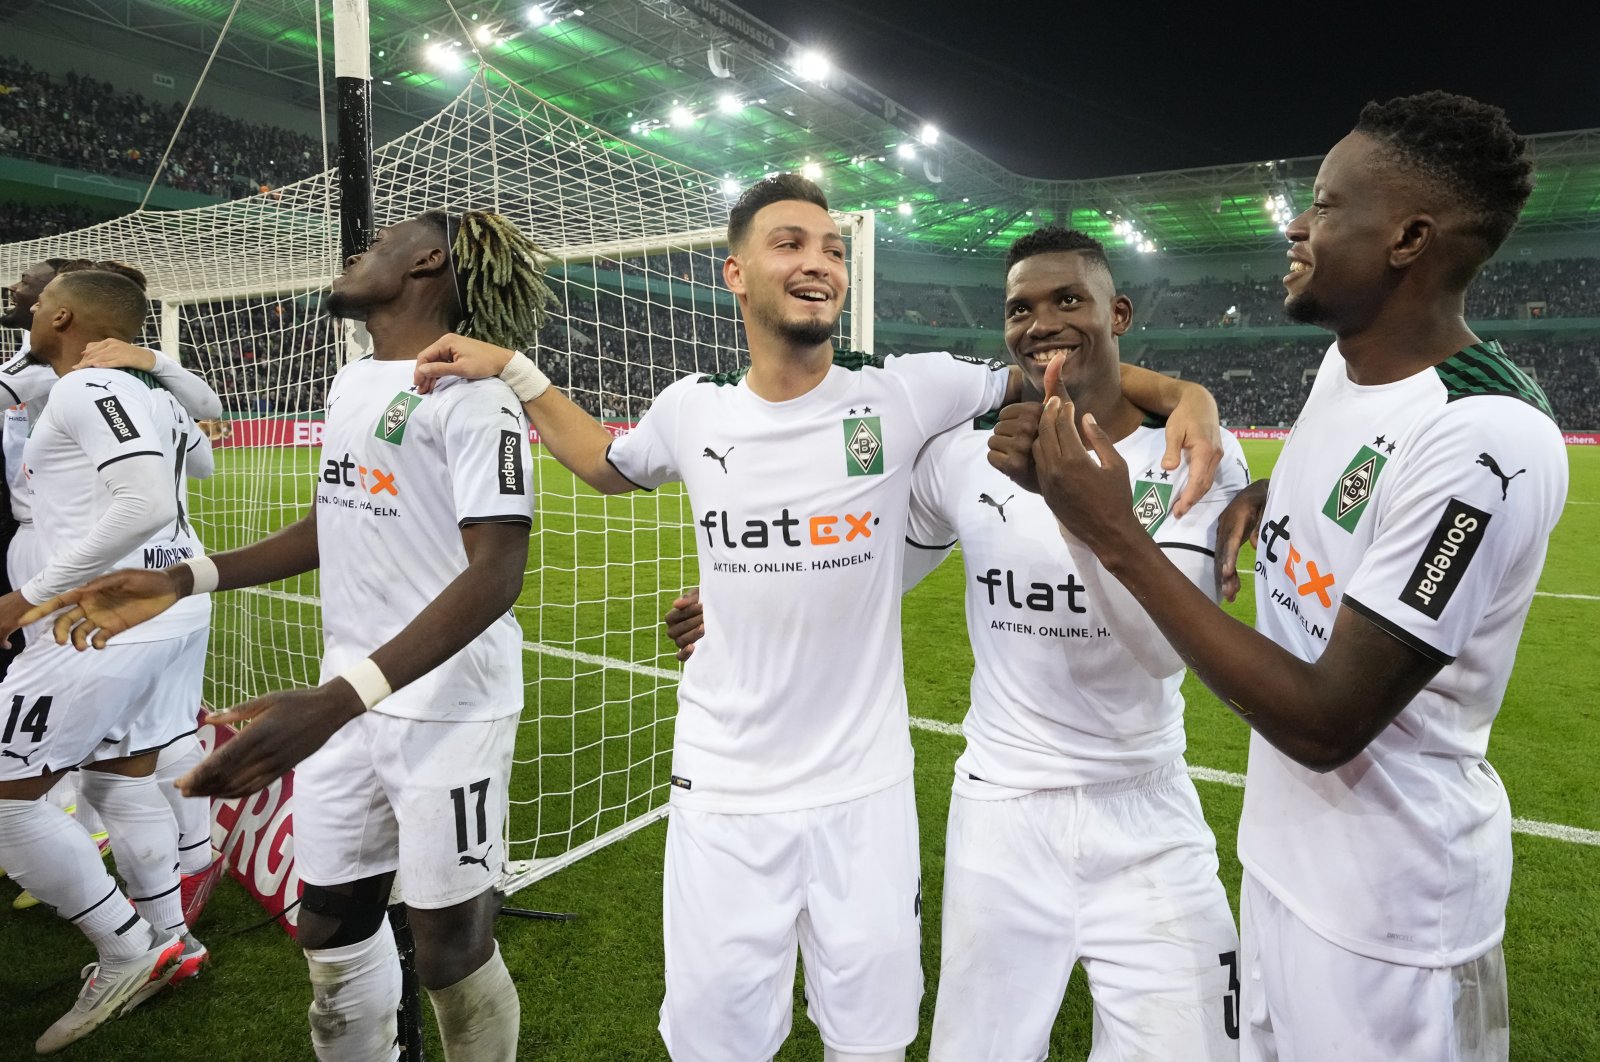 Monchengladbach players celebrate after the German Cup match against Borussia Monchengladbach at the Borussia Park, in Monchengladbach, Germany, Oct. 27, 2021. (AP Photo)